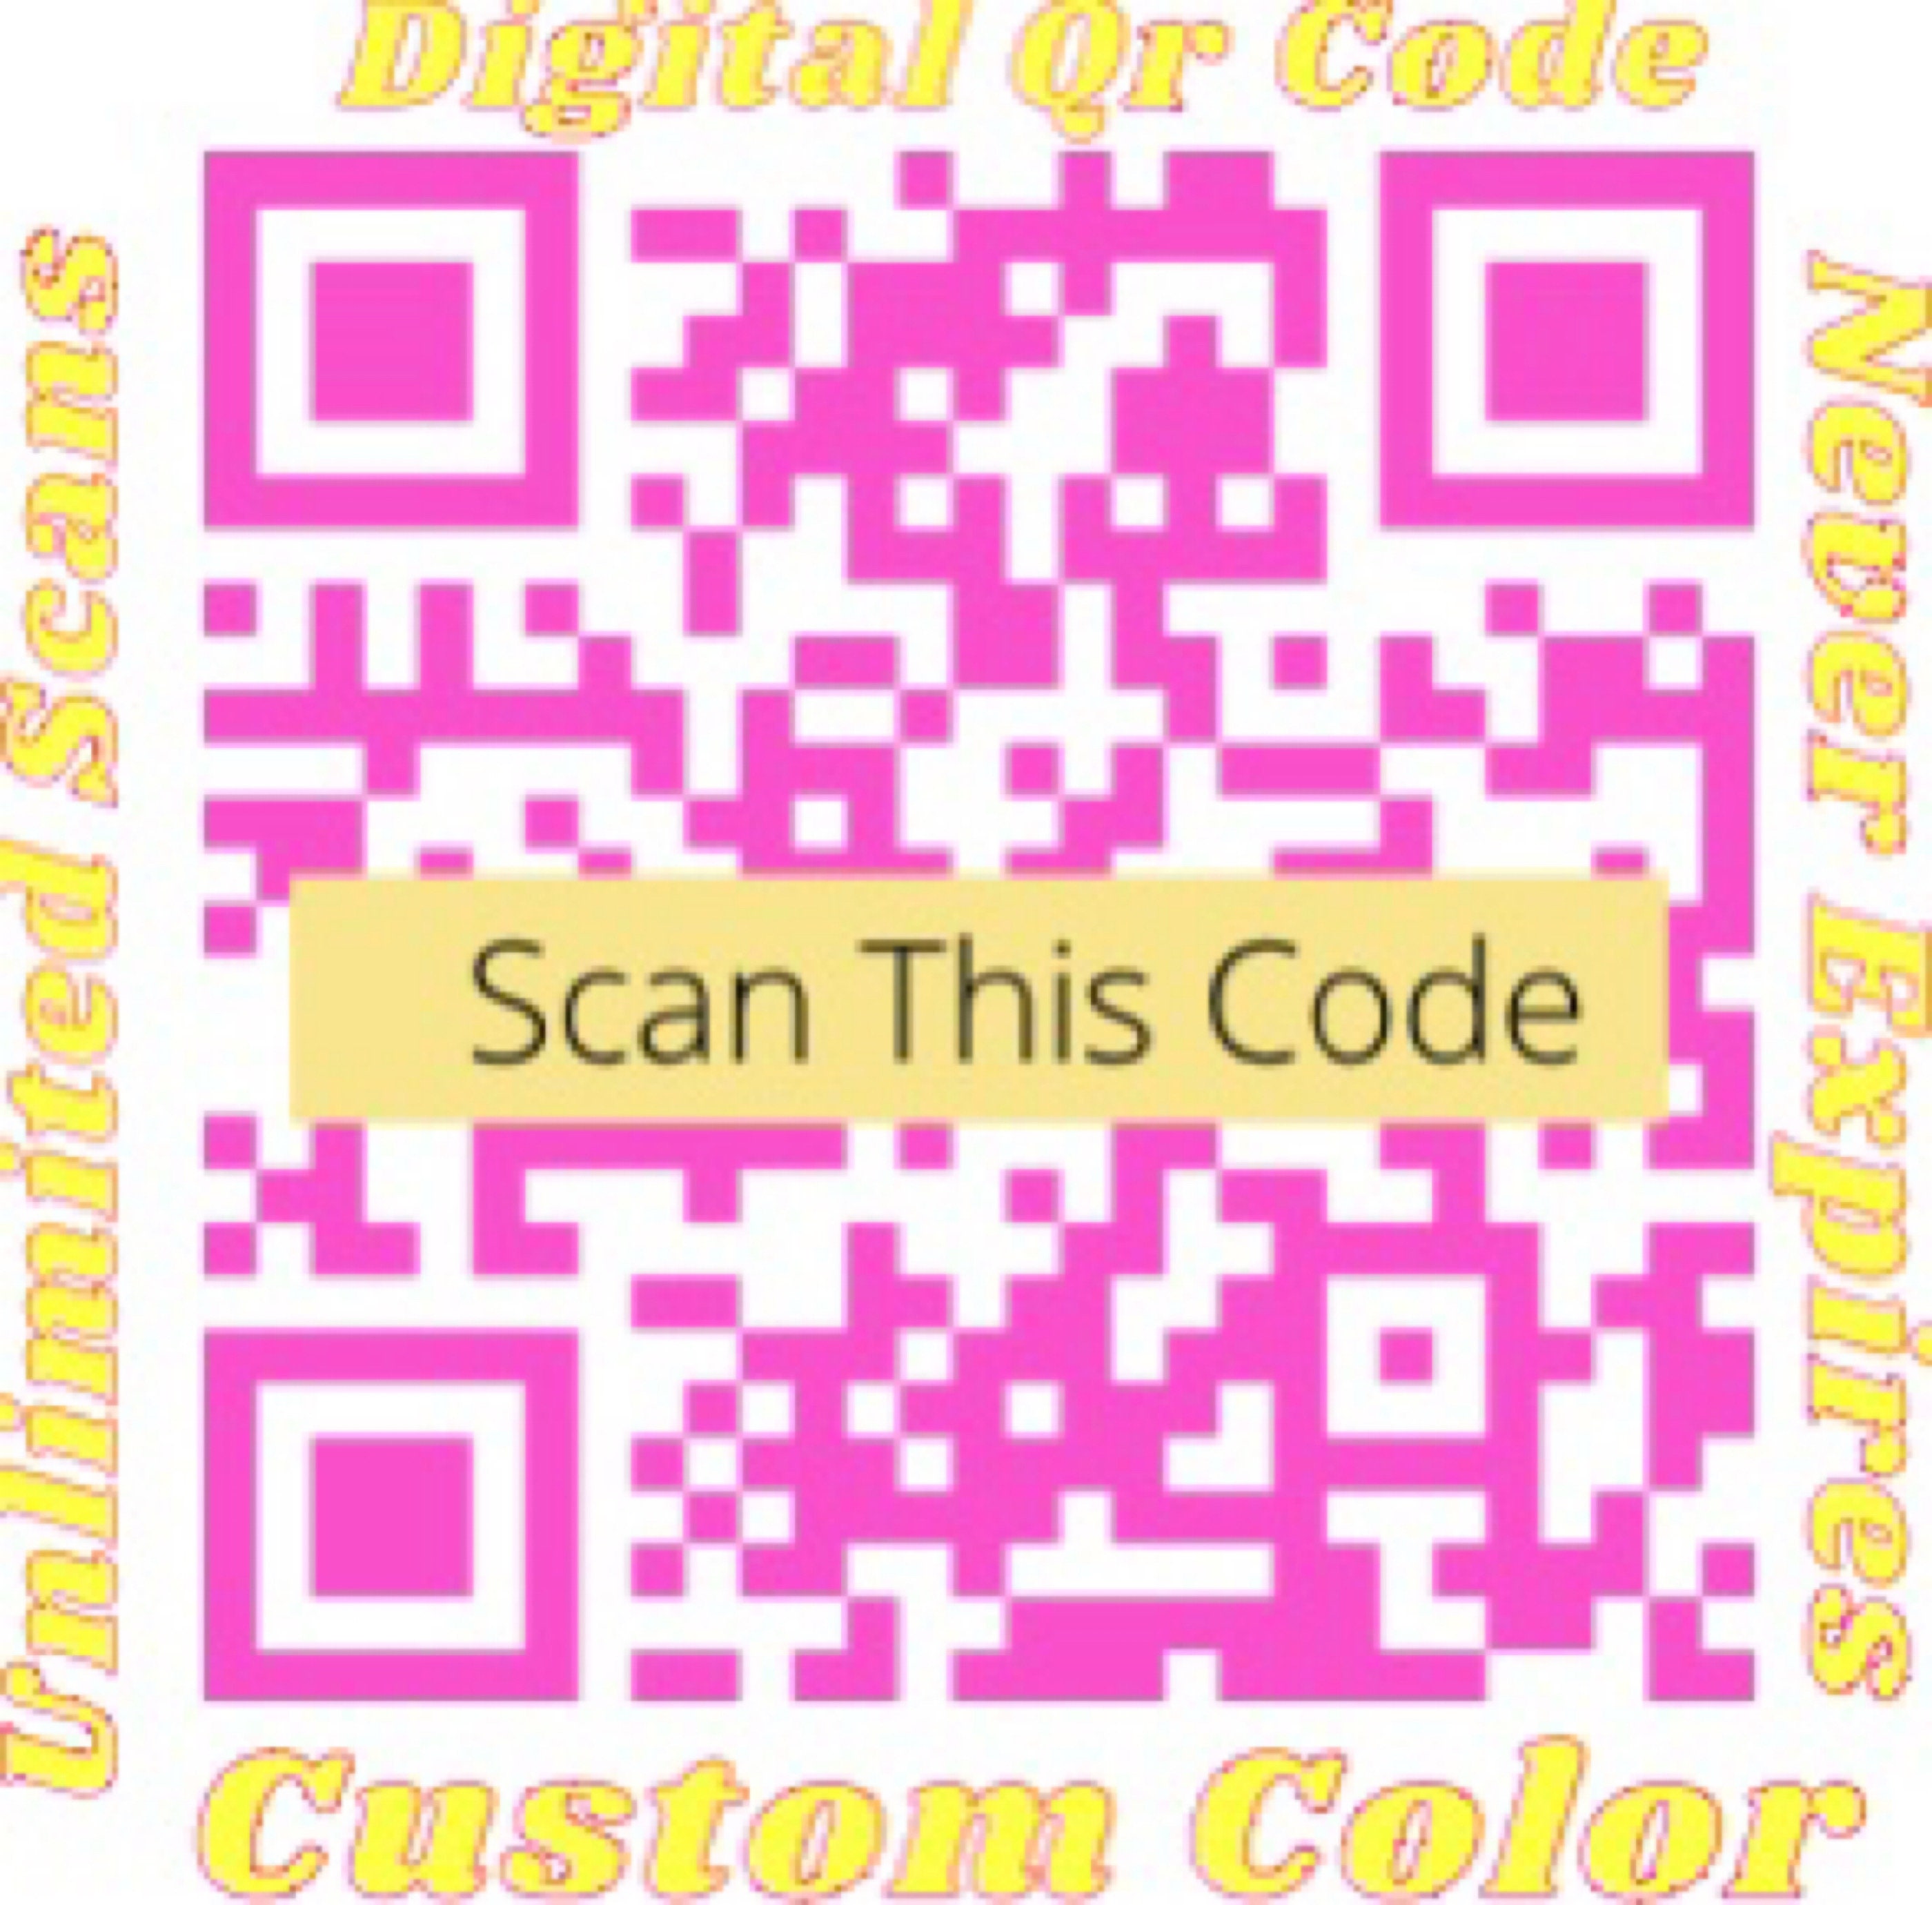 Digital Qr Code Download Scan to Pay Qr Code Qr Codes for Weddings, Baby  Shower Registry, Business Cards, Signs Custom Qr Codes - Etsy